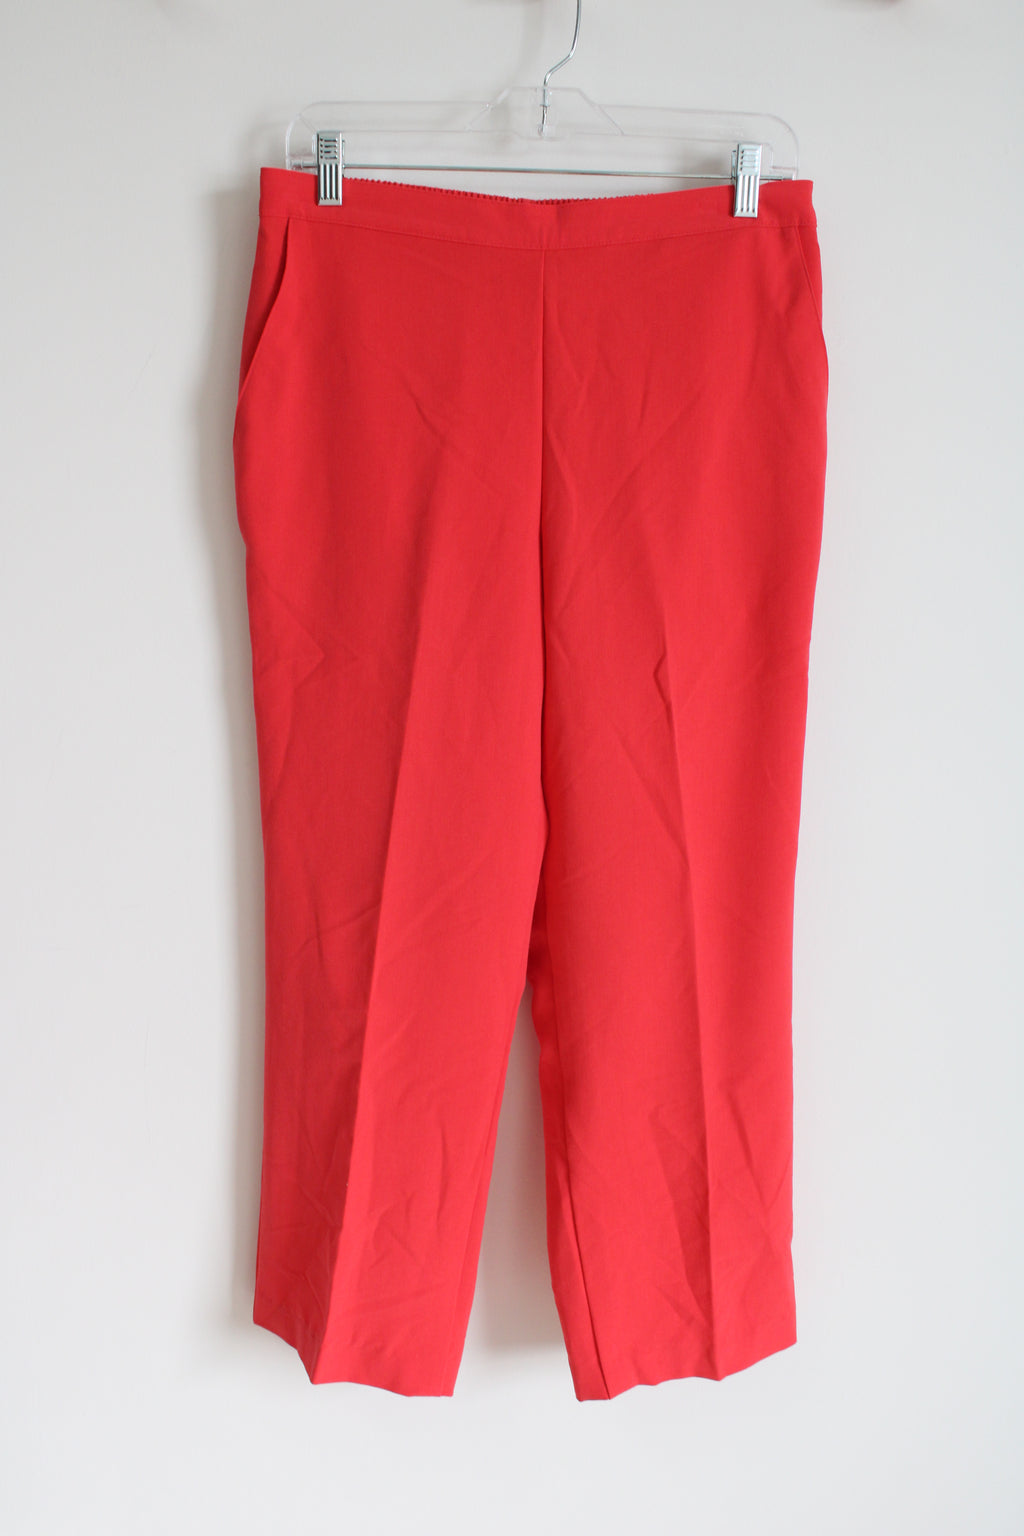 Alfred Dunner Coral Red Ankle Pant | 12 Petite